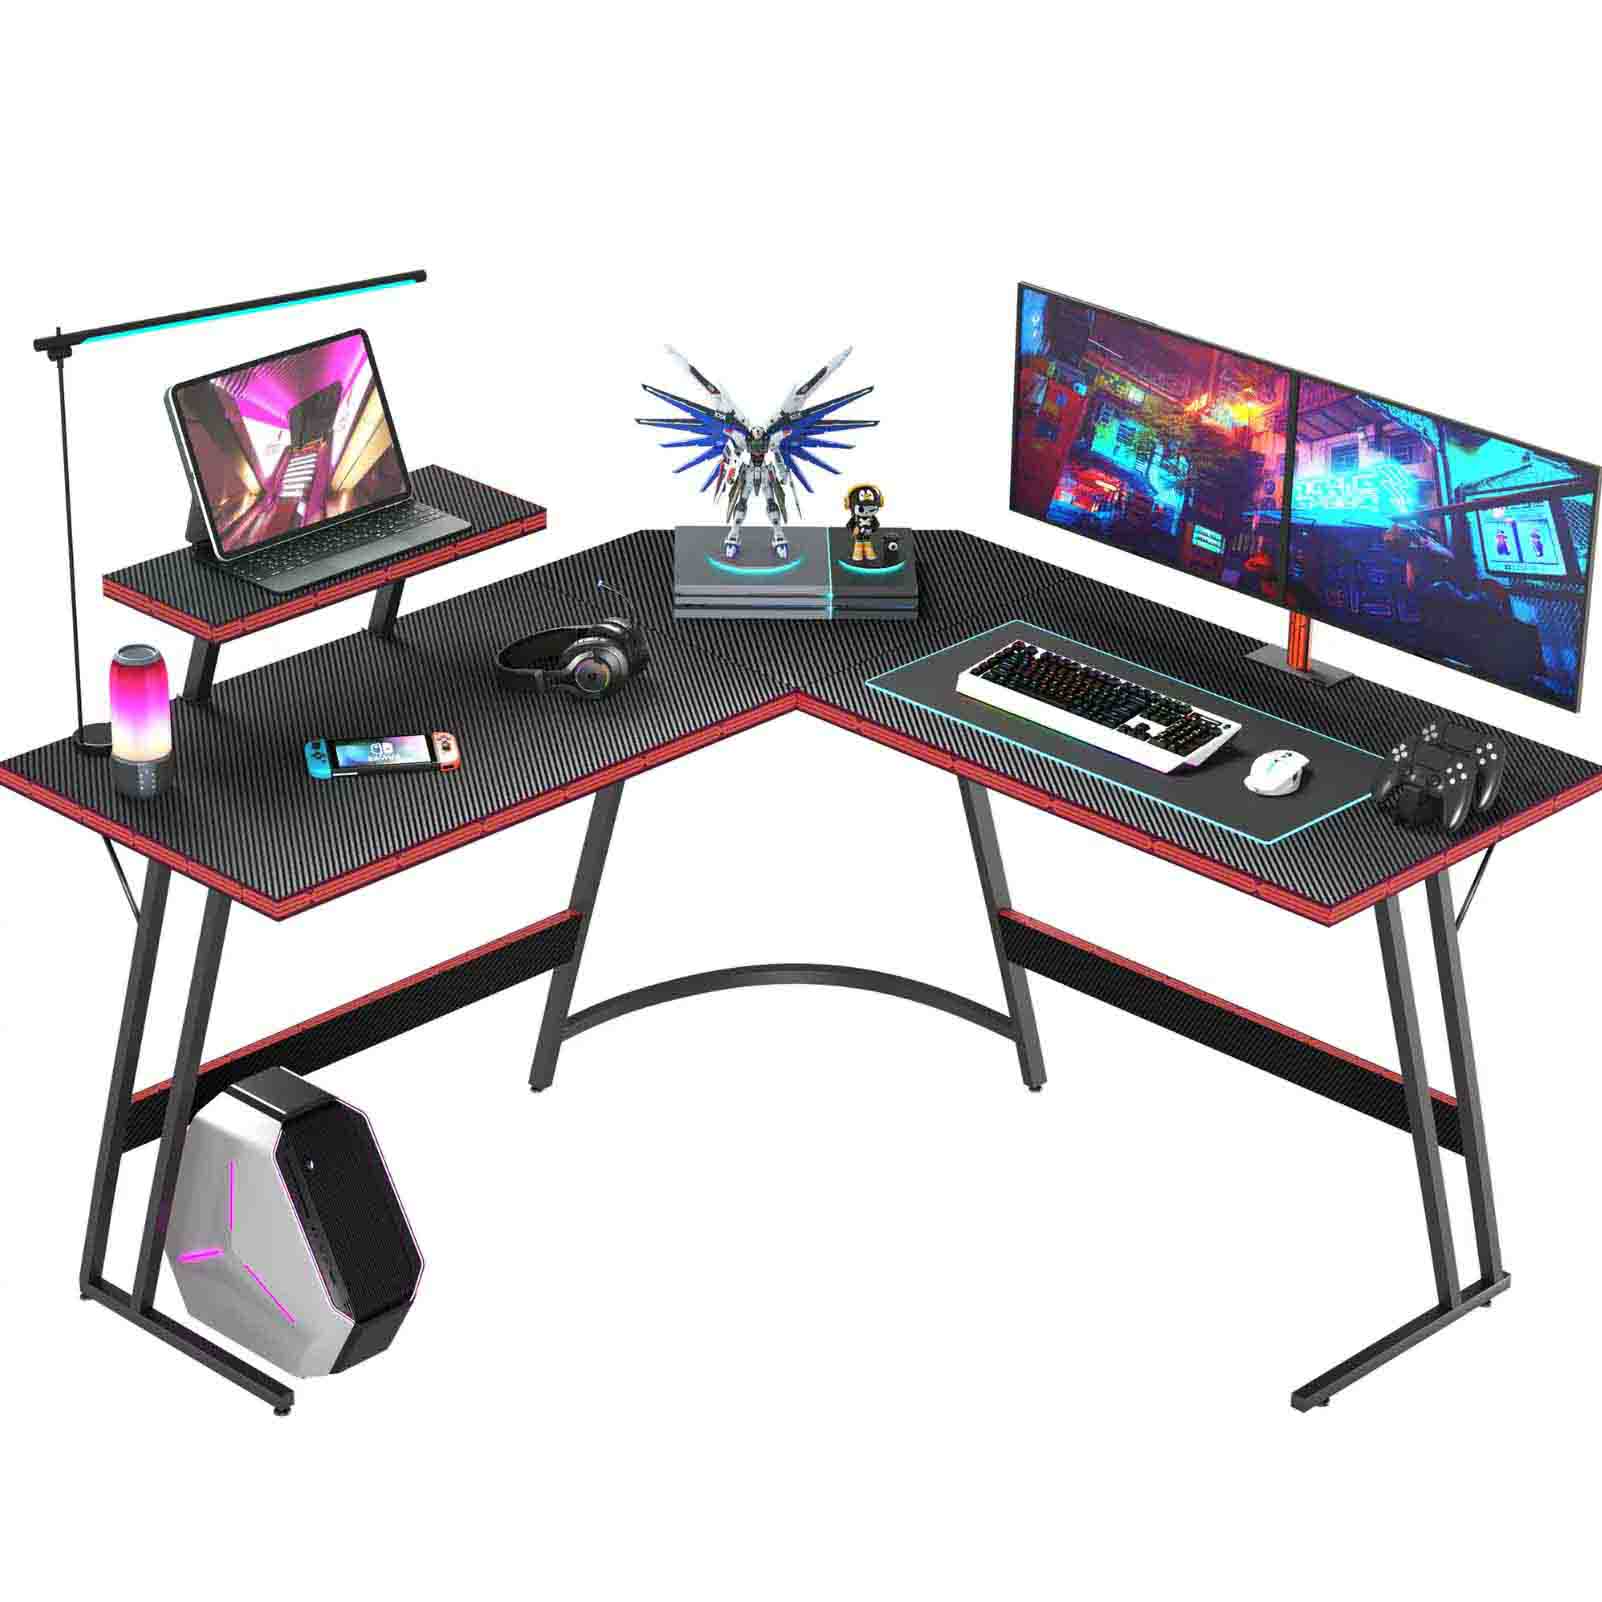 L-shaped game desk with laptop and monitor